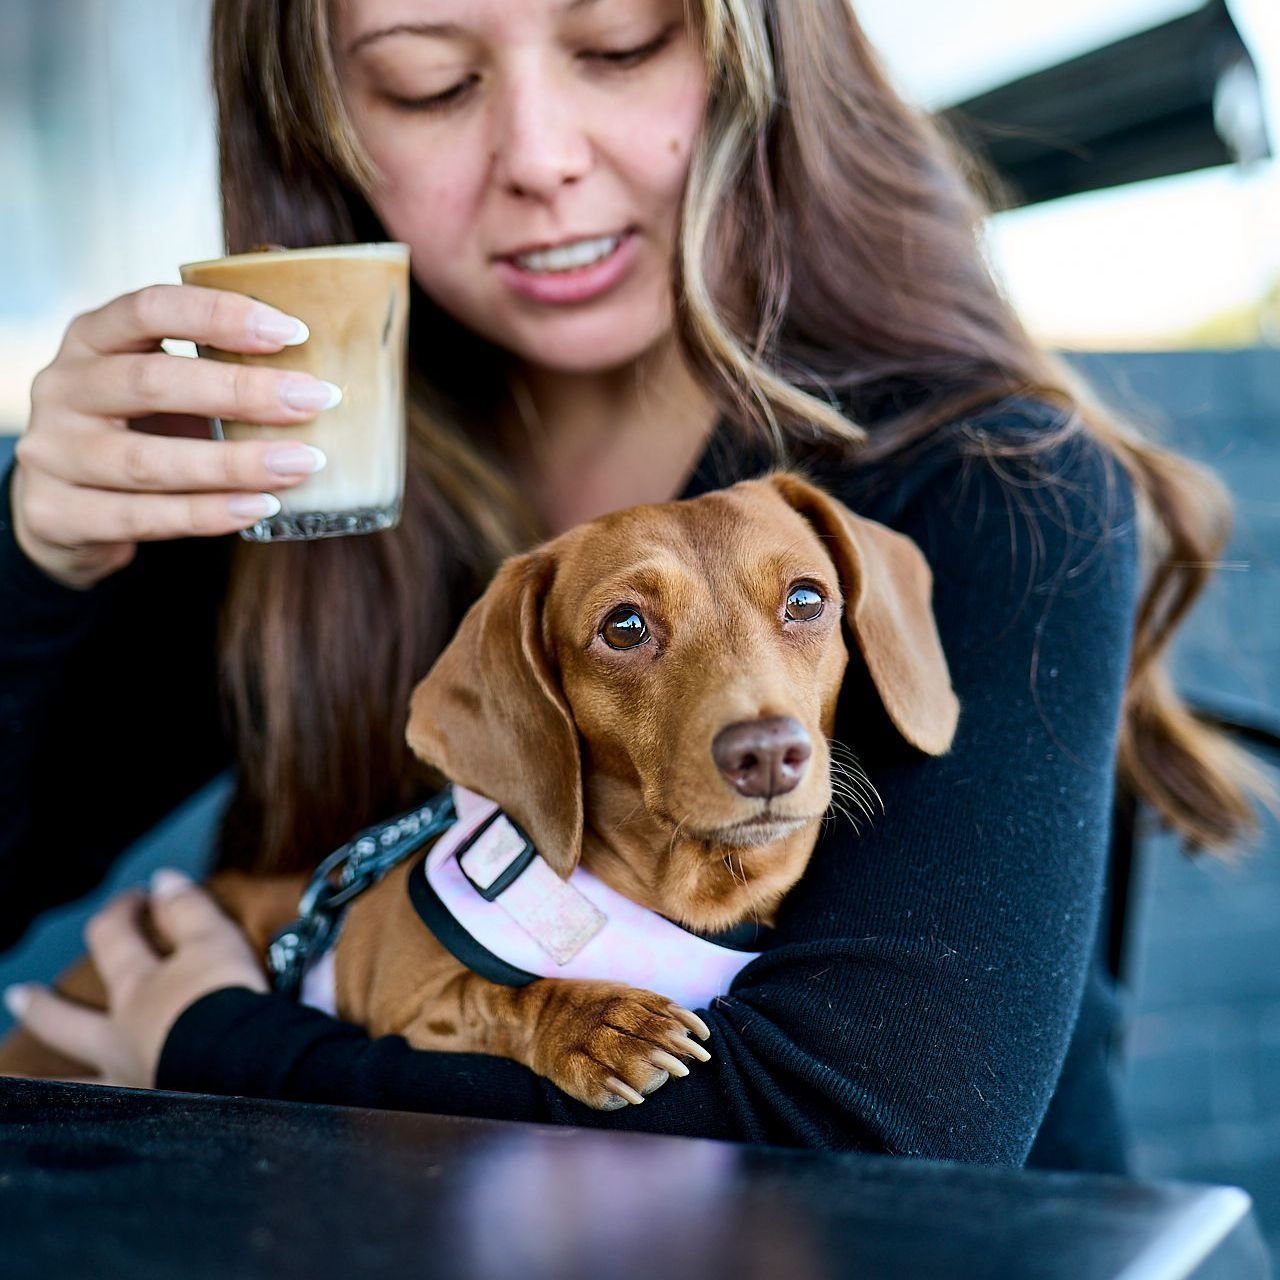 What's better than coffee on a Saturday morning?!

Coffee with your pooch on a Saturday morning 🤝 Come down to the Corner Store with your bestie 🐶 and grab a table outdoors while you enjoy the start of your weekend.